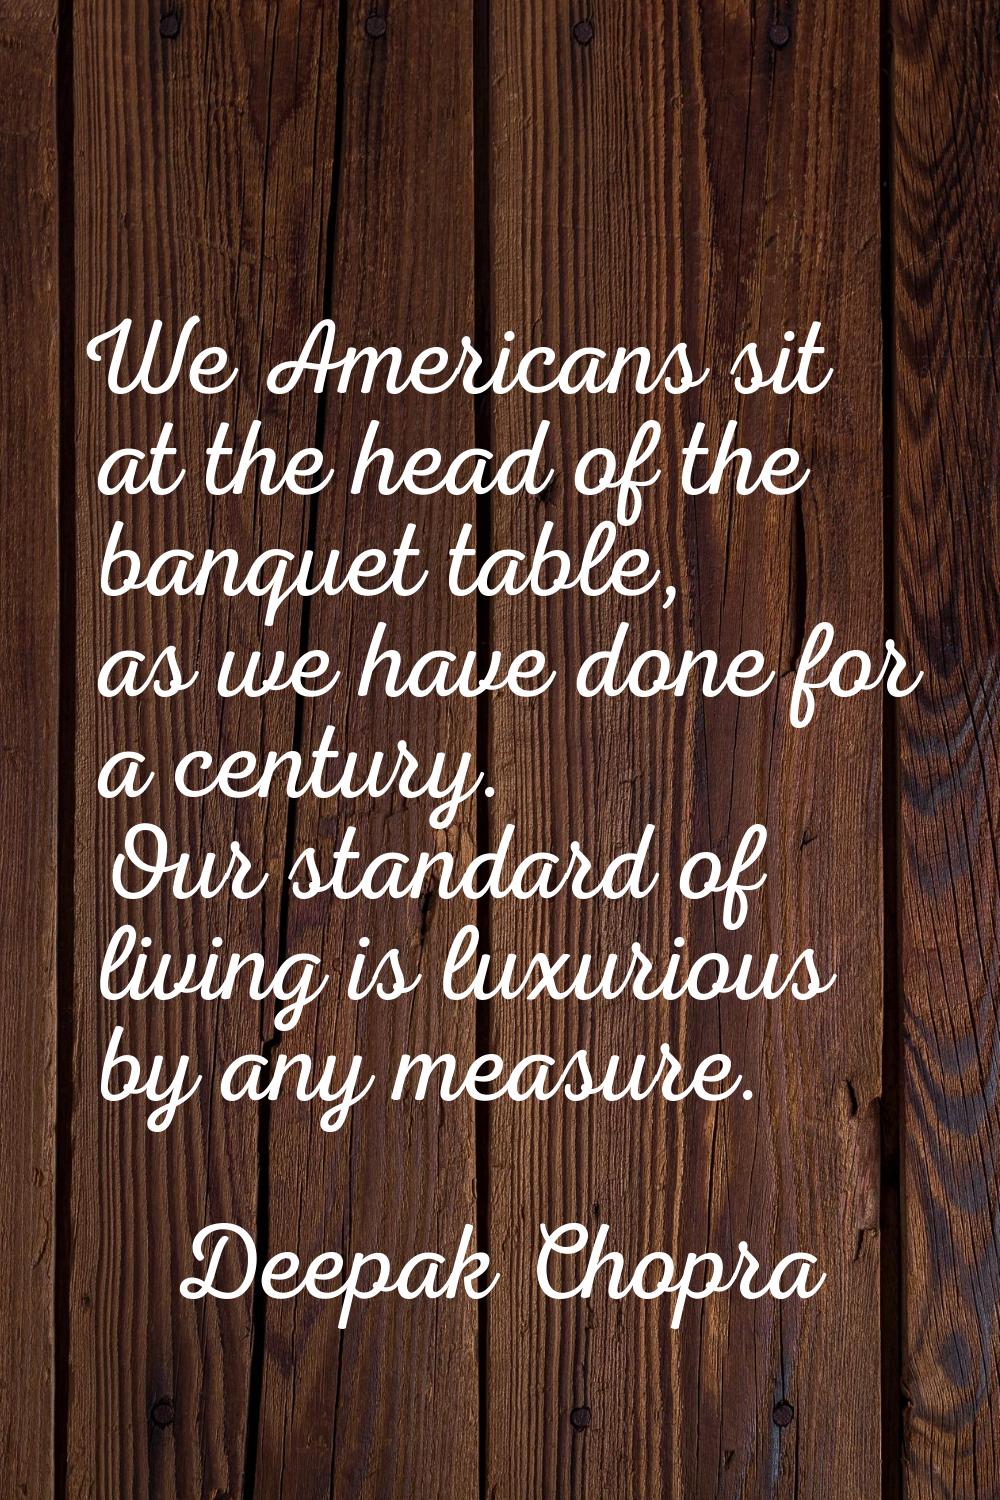 We Americans sit at the head of the banquet table, as we have done for a century. Our standard of l